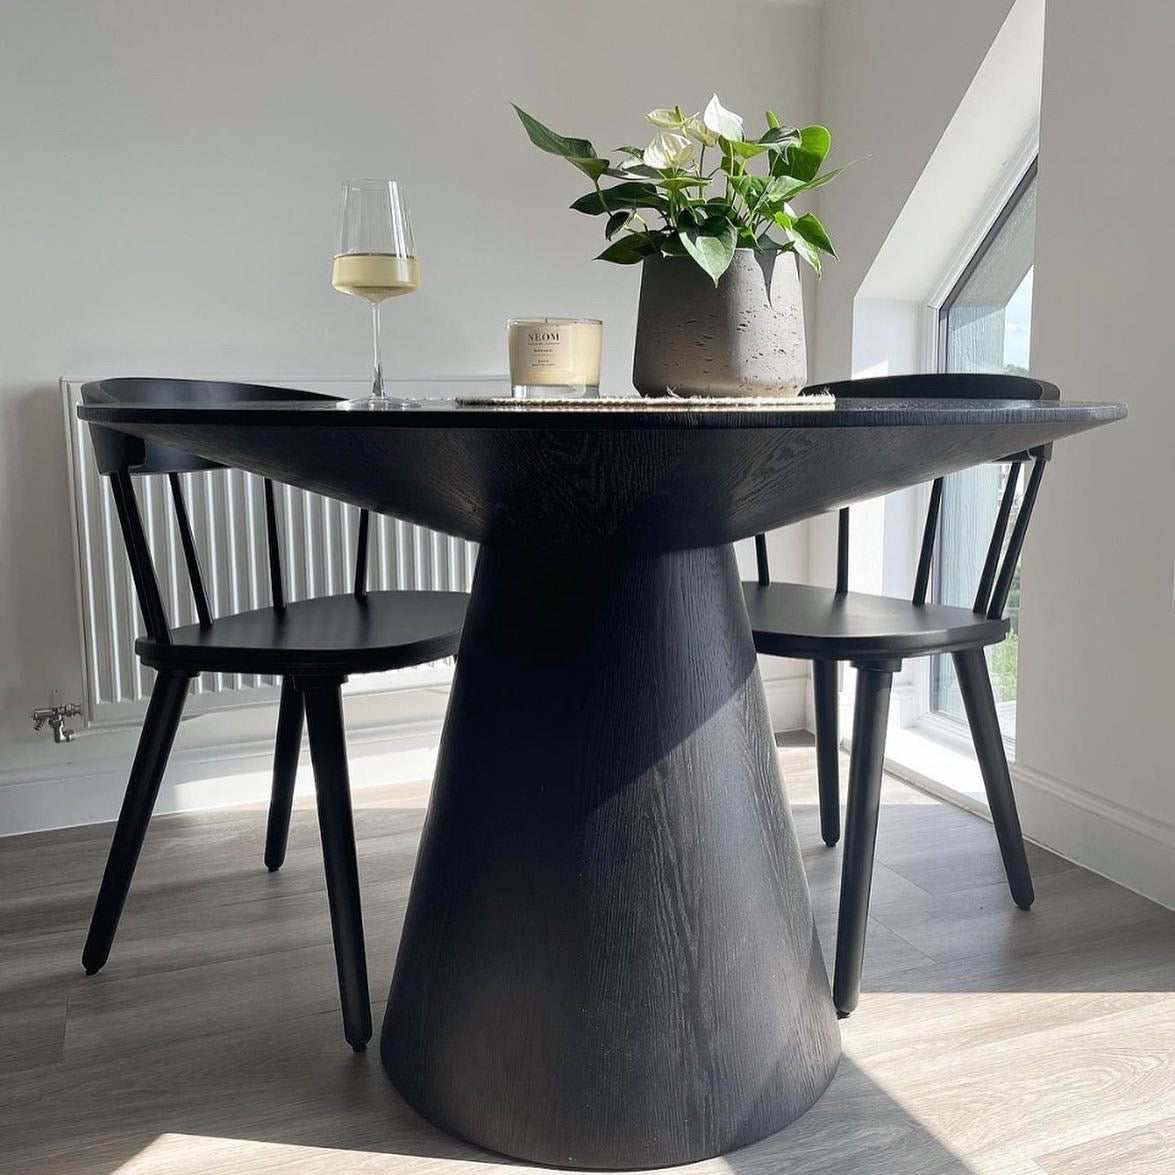 Lotus Round Colonial Dining Table - Black Stained Oak by Twenty10 Designs - Interitower | UK 